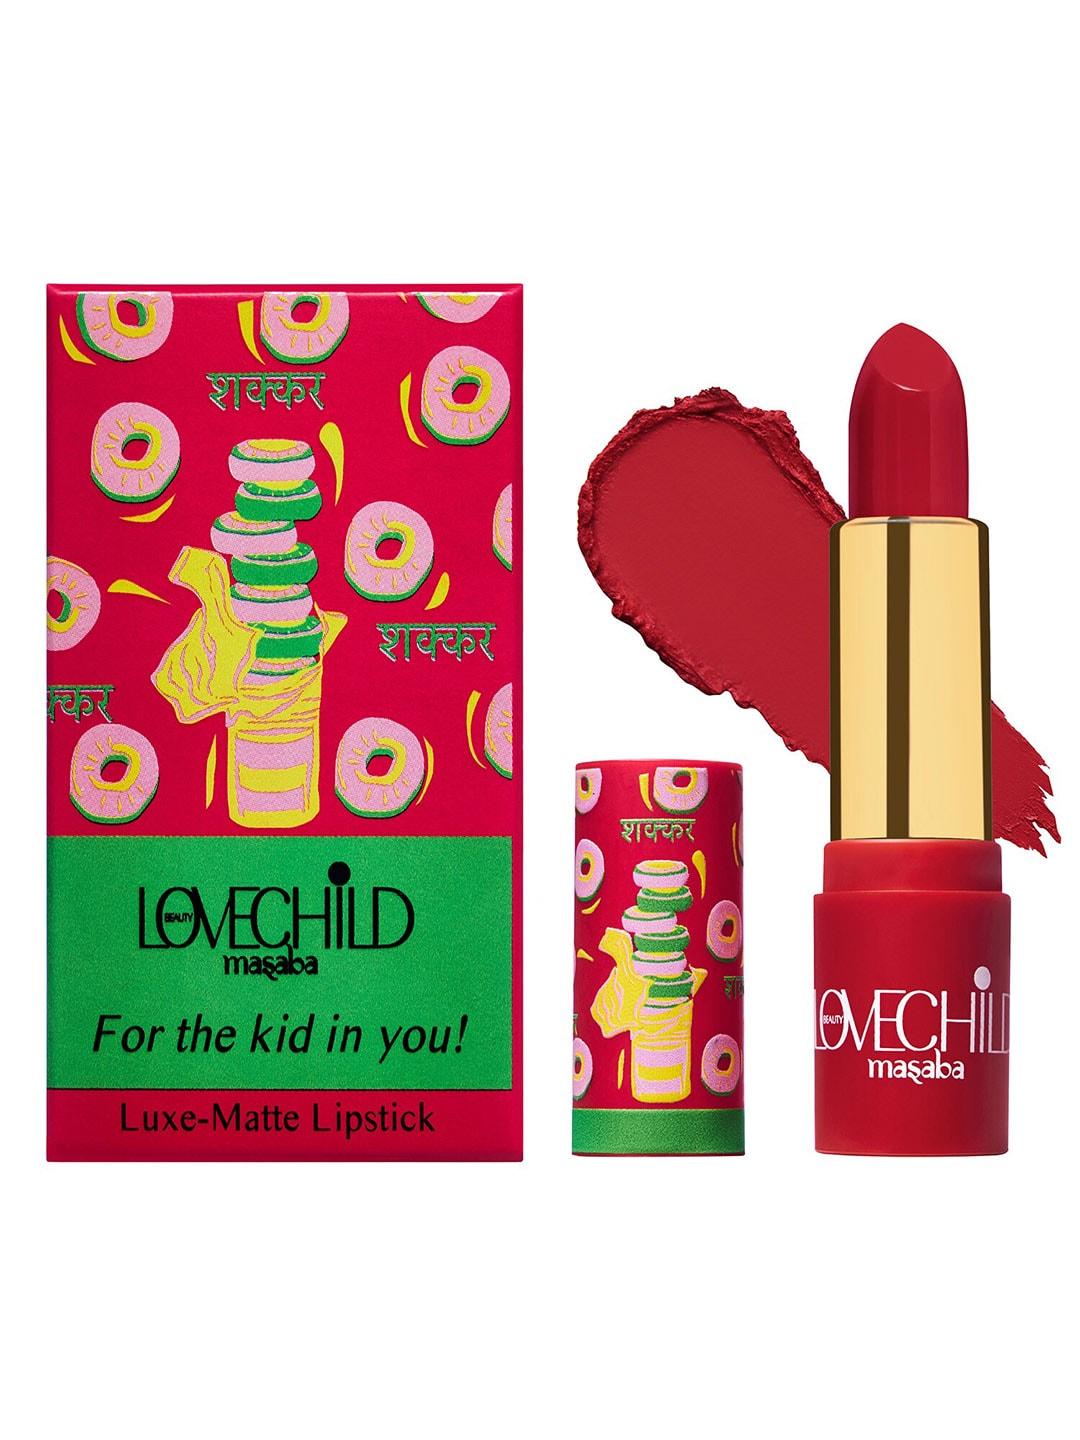 Lovechild Masaba For The Kid In You Luxe-Matte Lipstick 4 g-Twisted 10